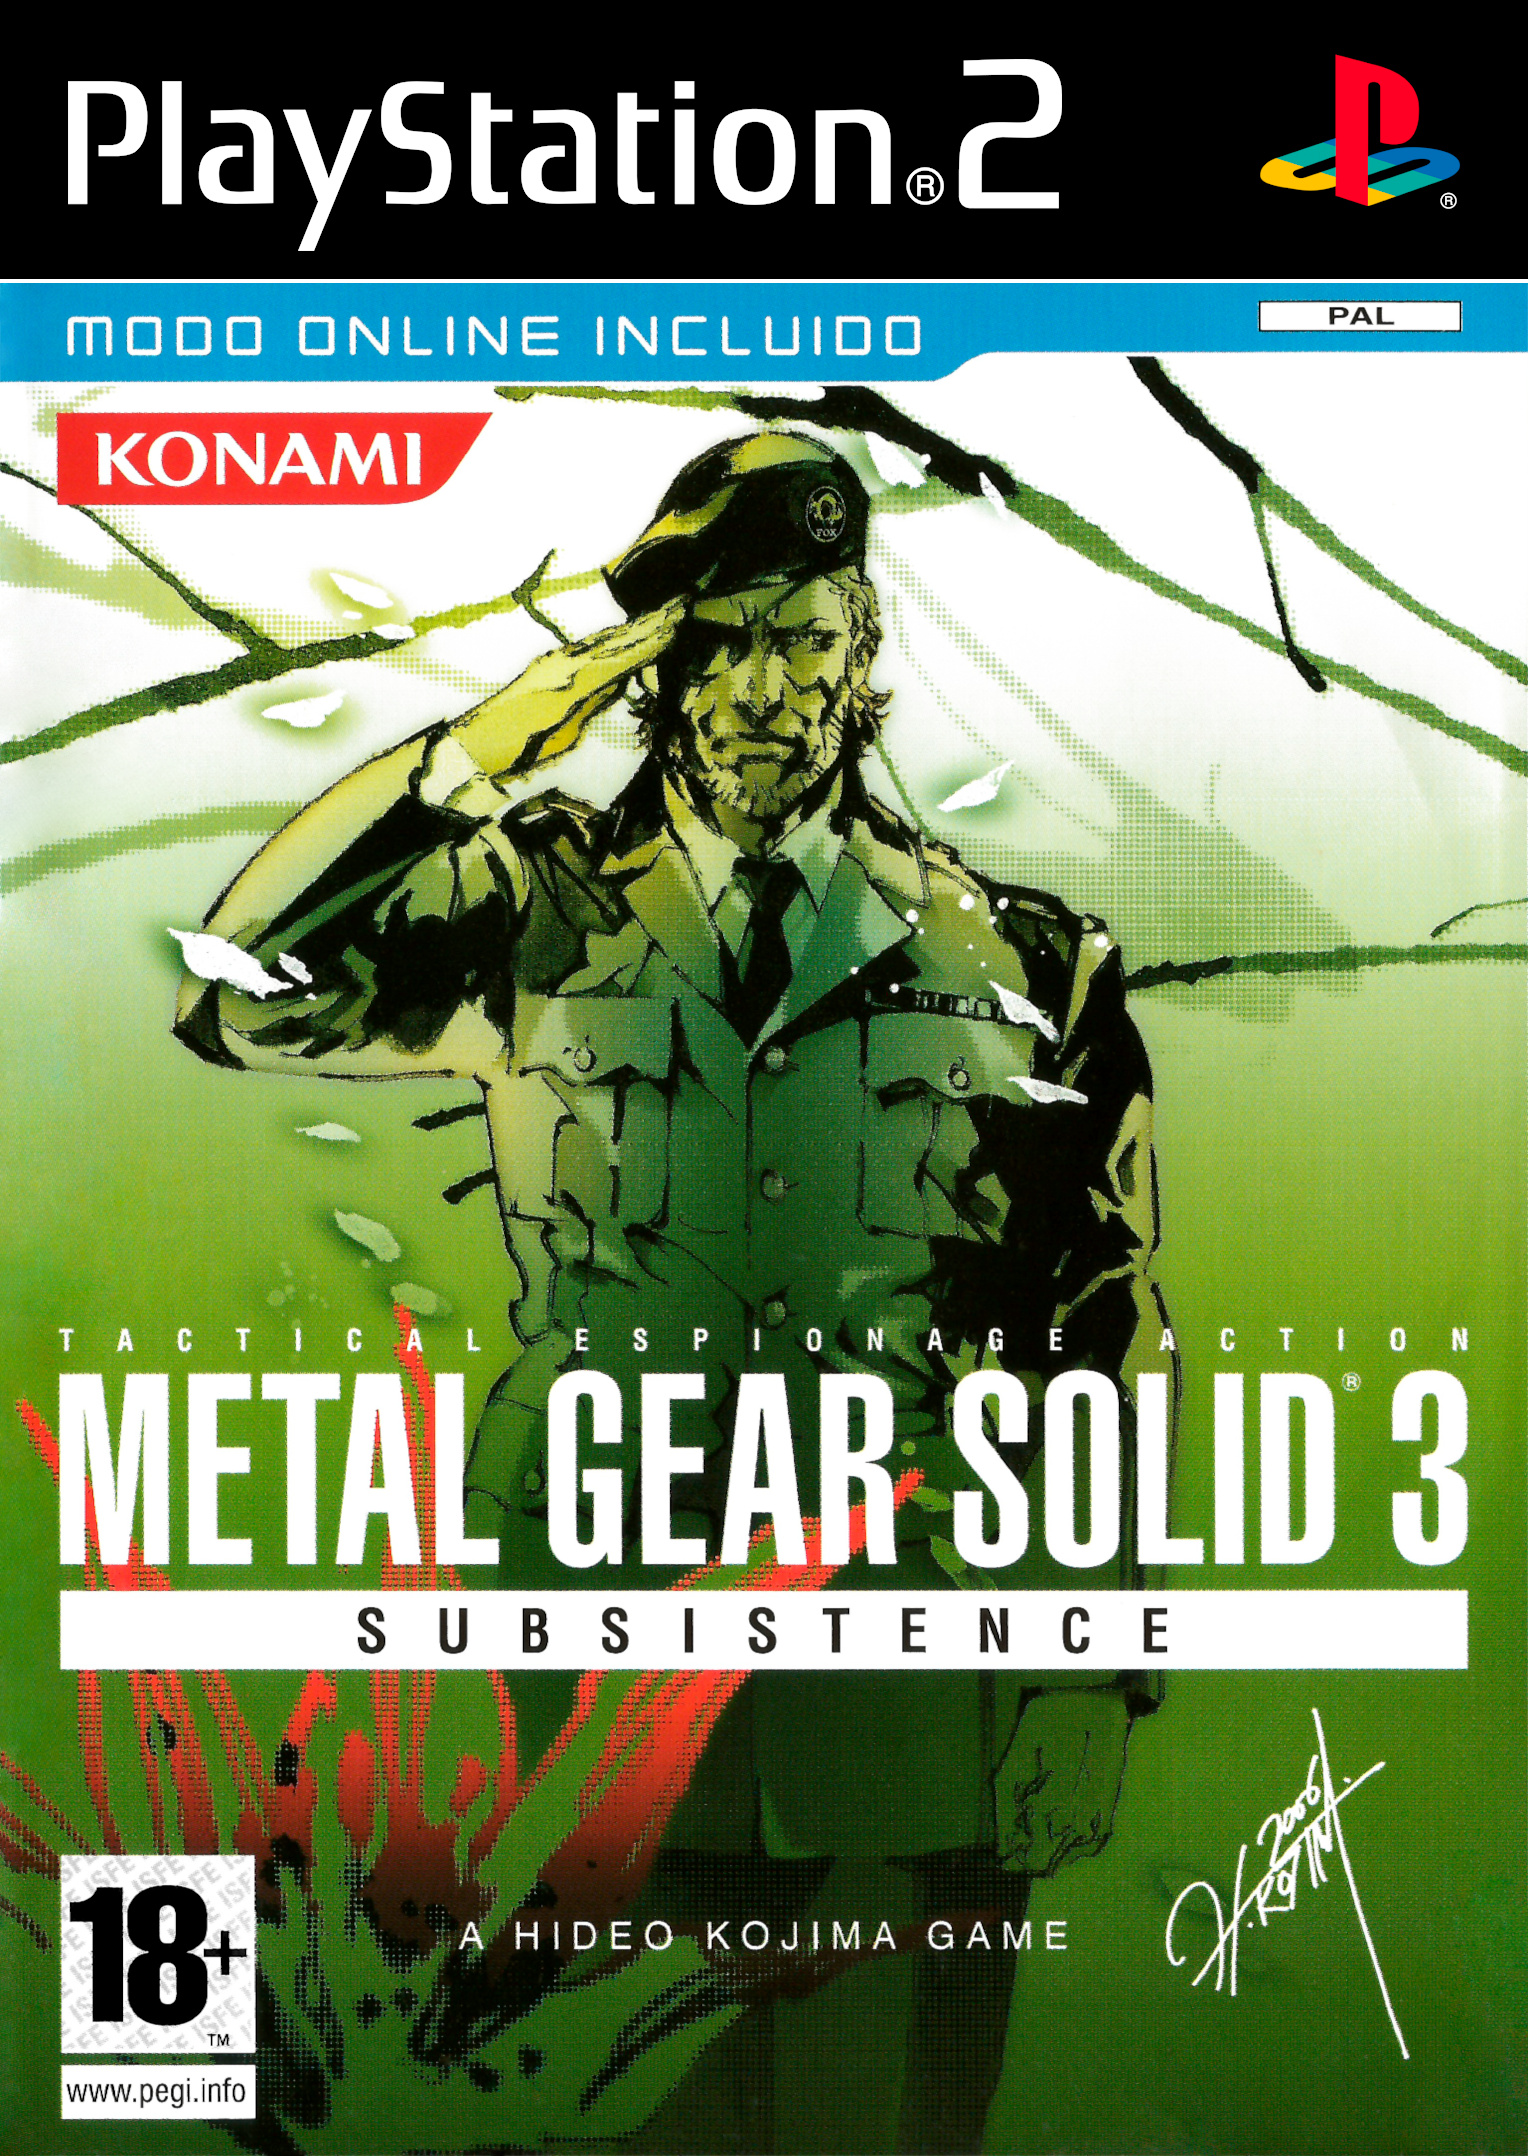 metal-gear-solid-3-subsistence-details-launchbox-games-database